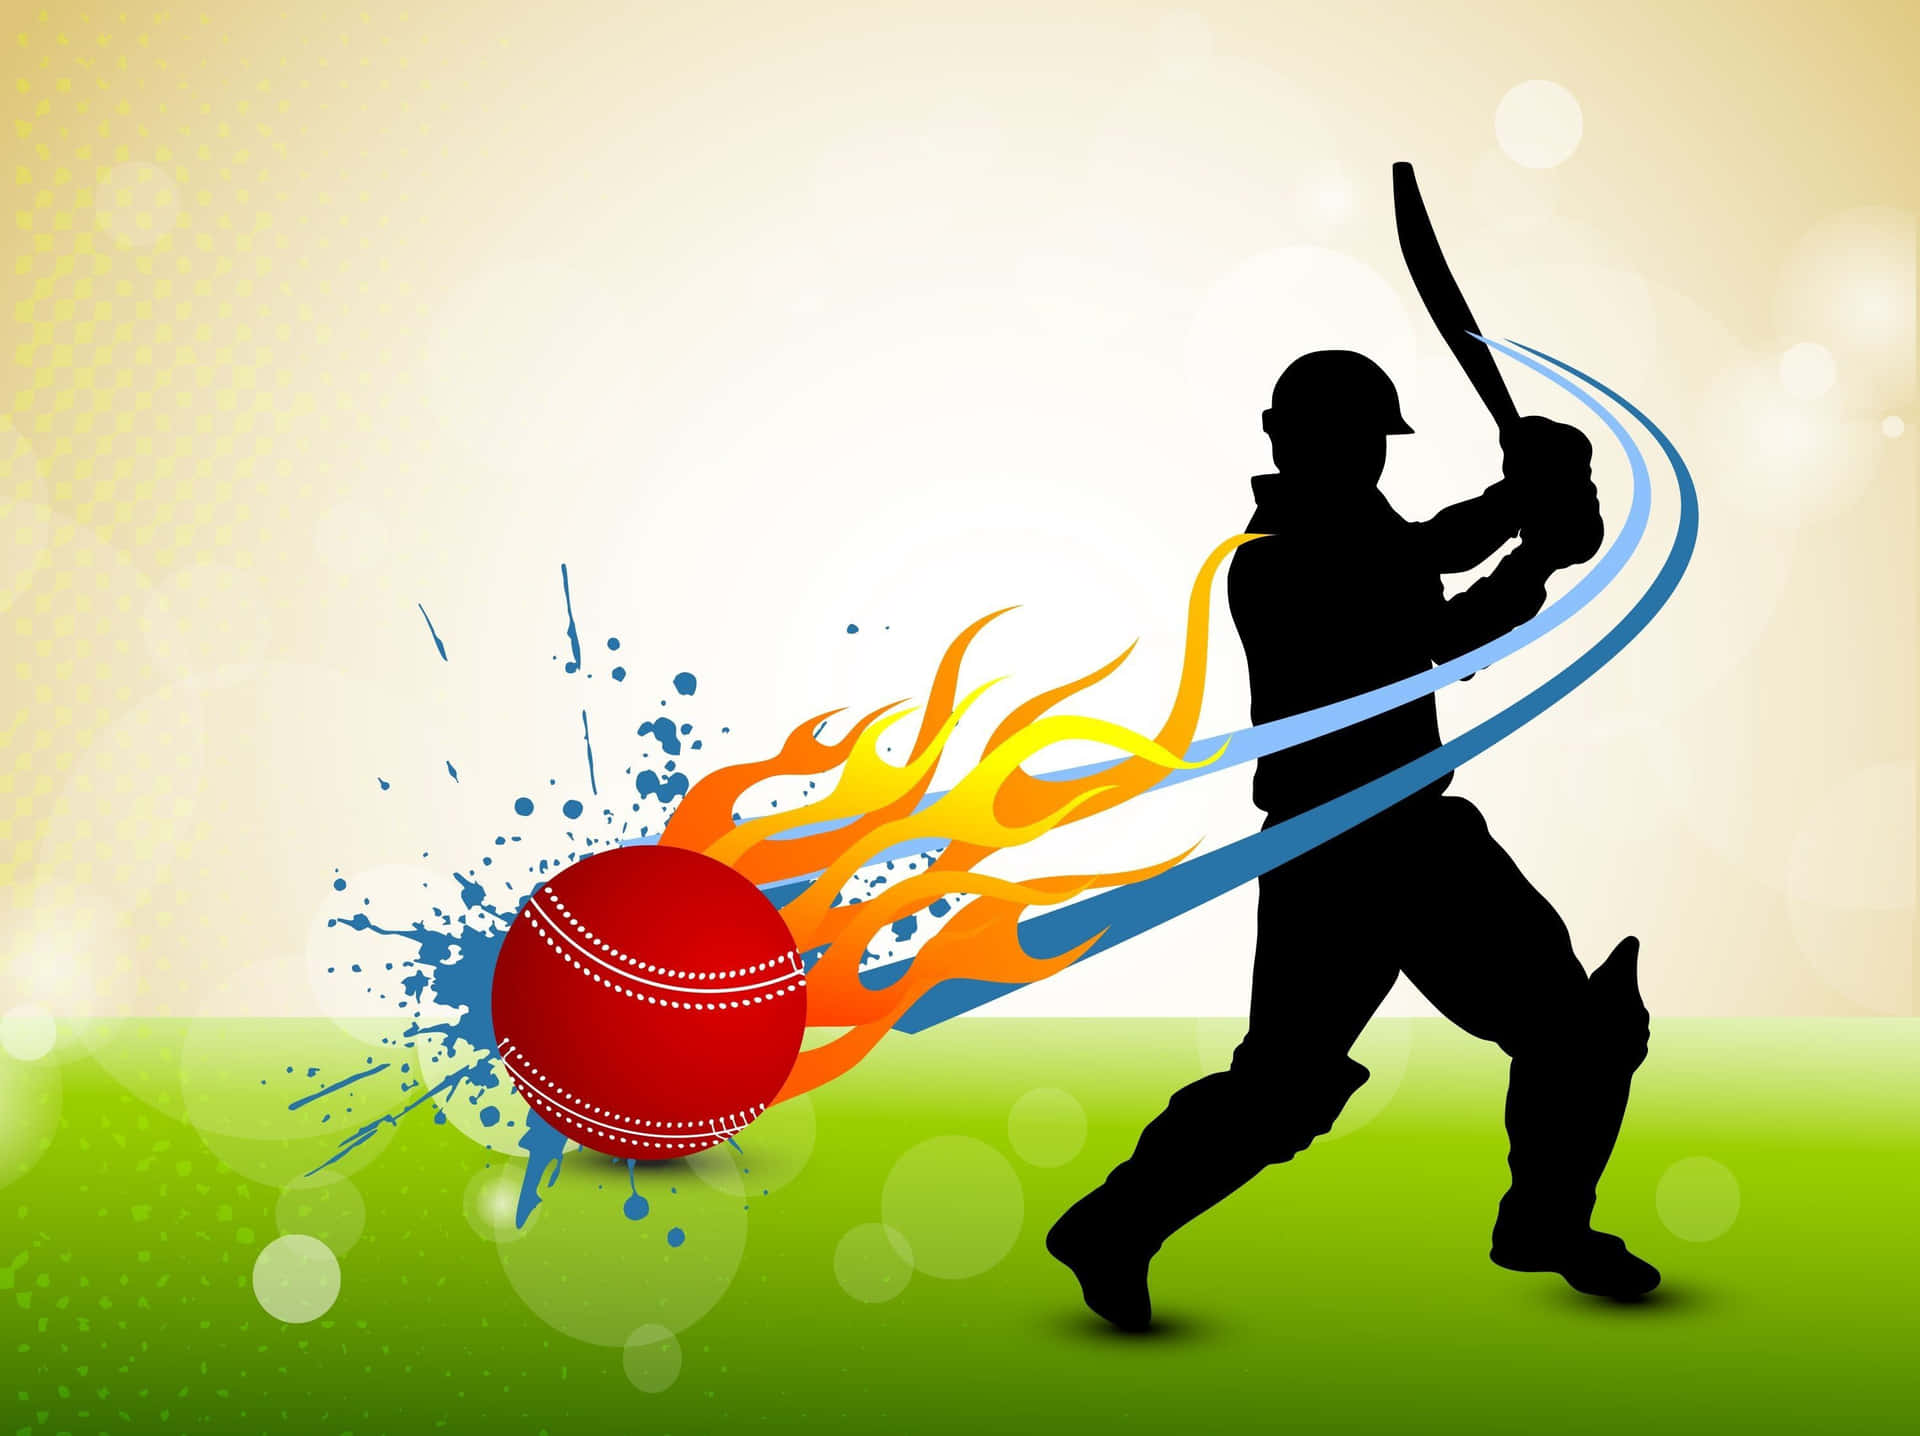 Cricket Player Hitting A Ball With Flames Wallpaper